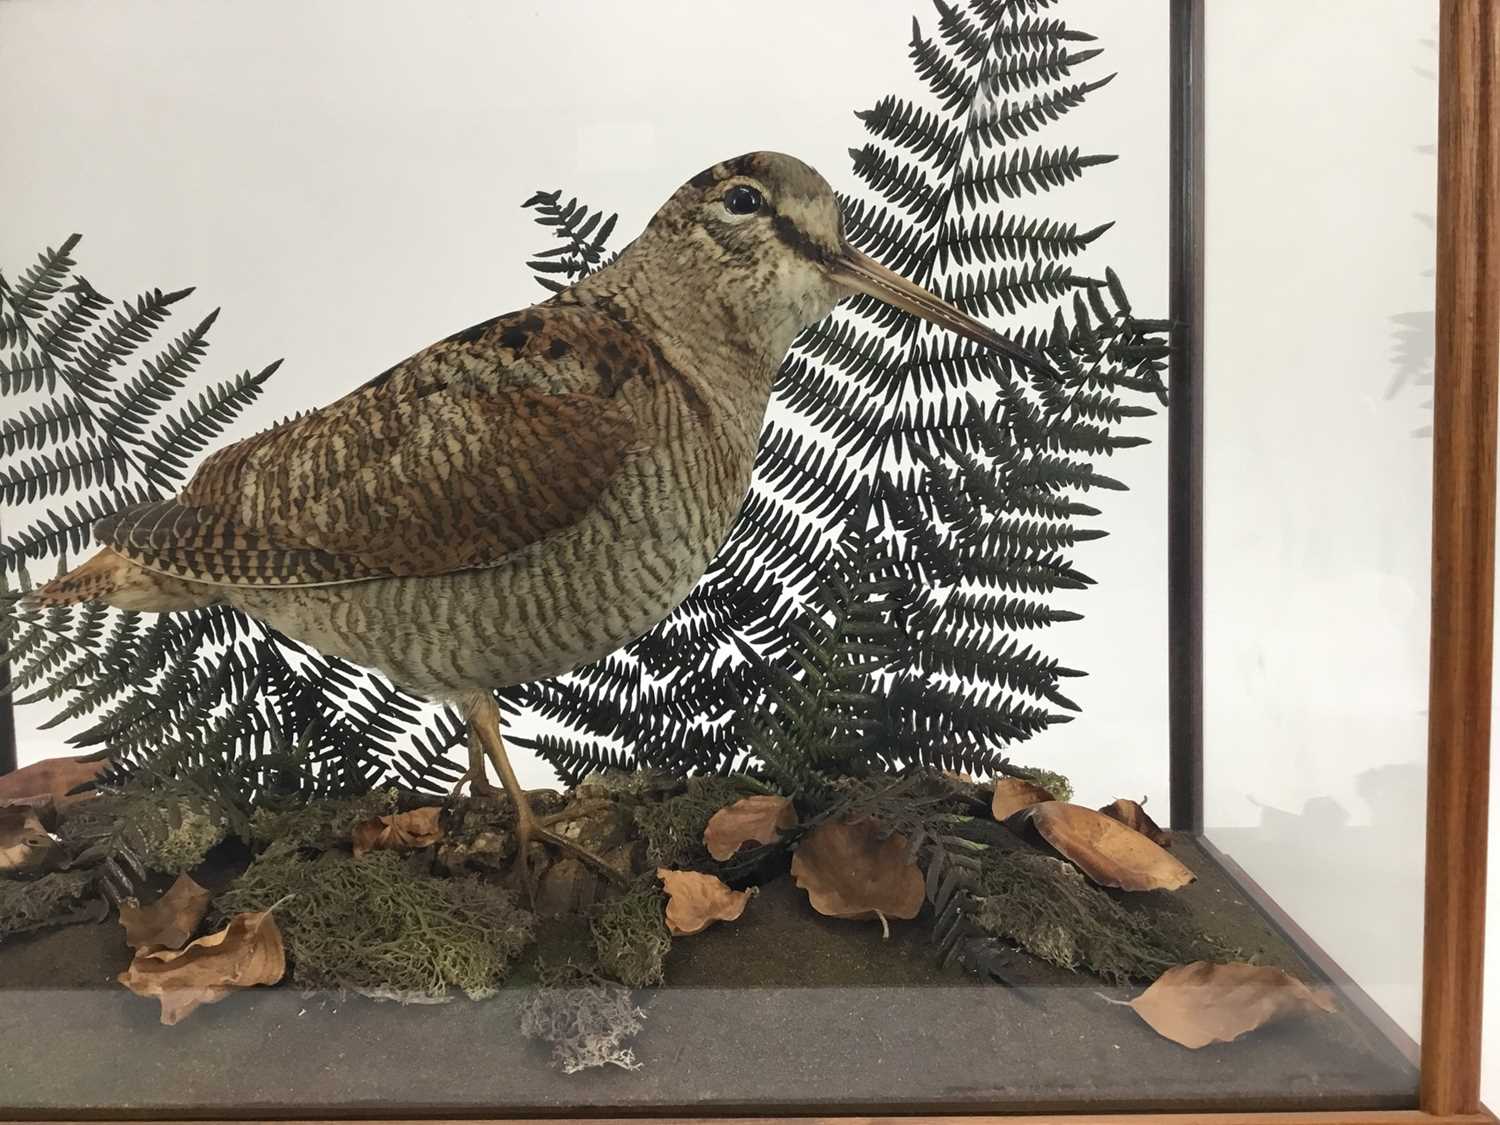 Woodcock within naturalistic setting in glazed case - Image 2 of 4